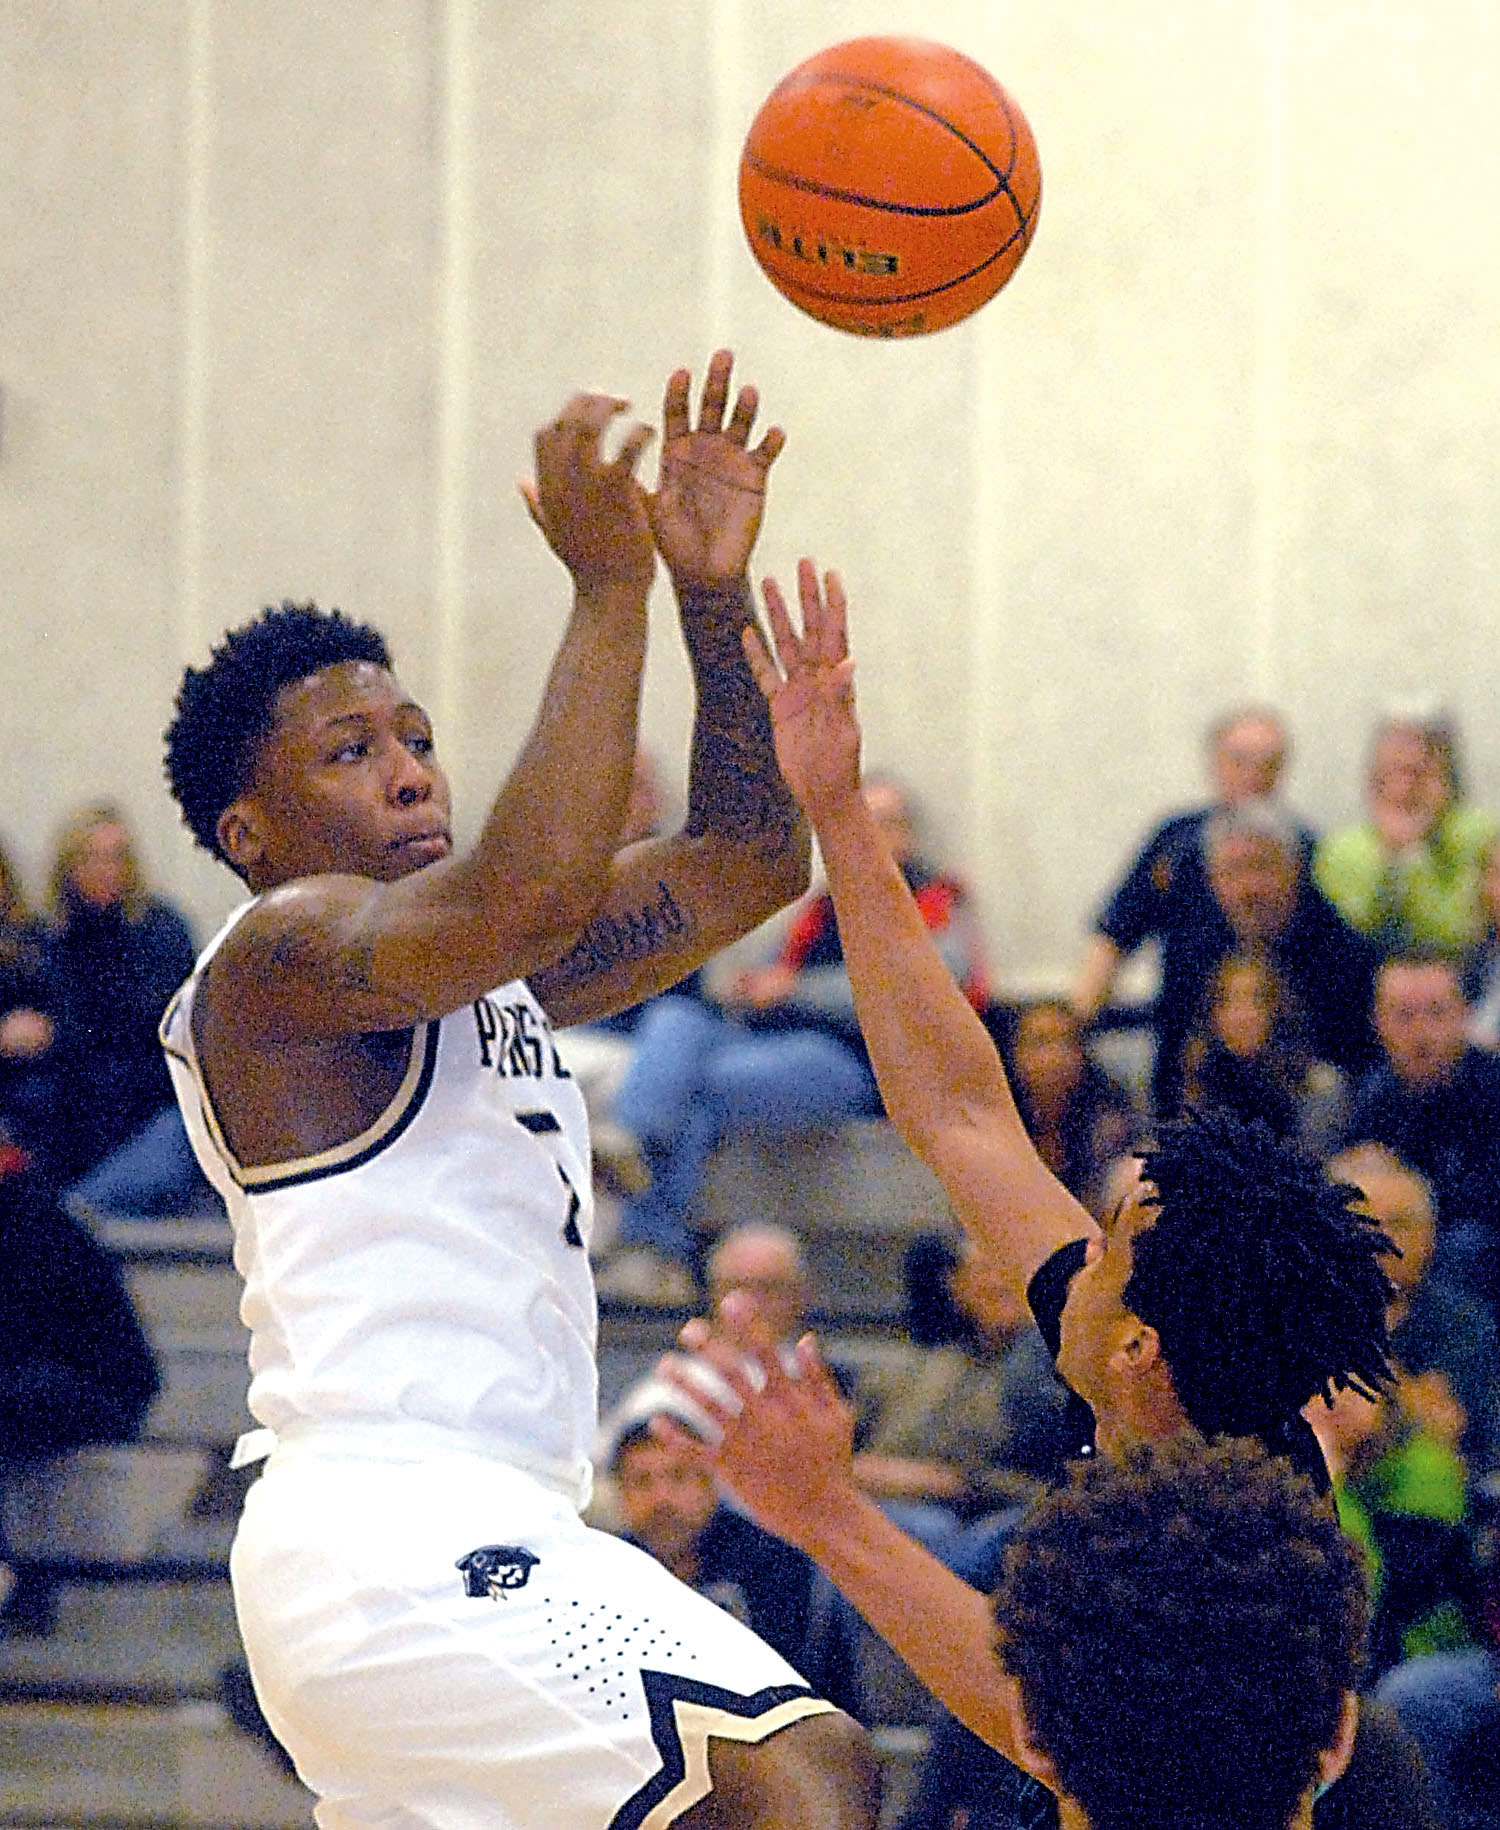 Peninsula's Darrion Daniels shoots over Highline's Coby Myles during their Nov. 21 matchup in Port Angeles. Daniels and the Pirates host the First Federal Pirate Classic on Saturday and Sunday. Keith Thorpe/Peninsula Daily News